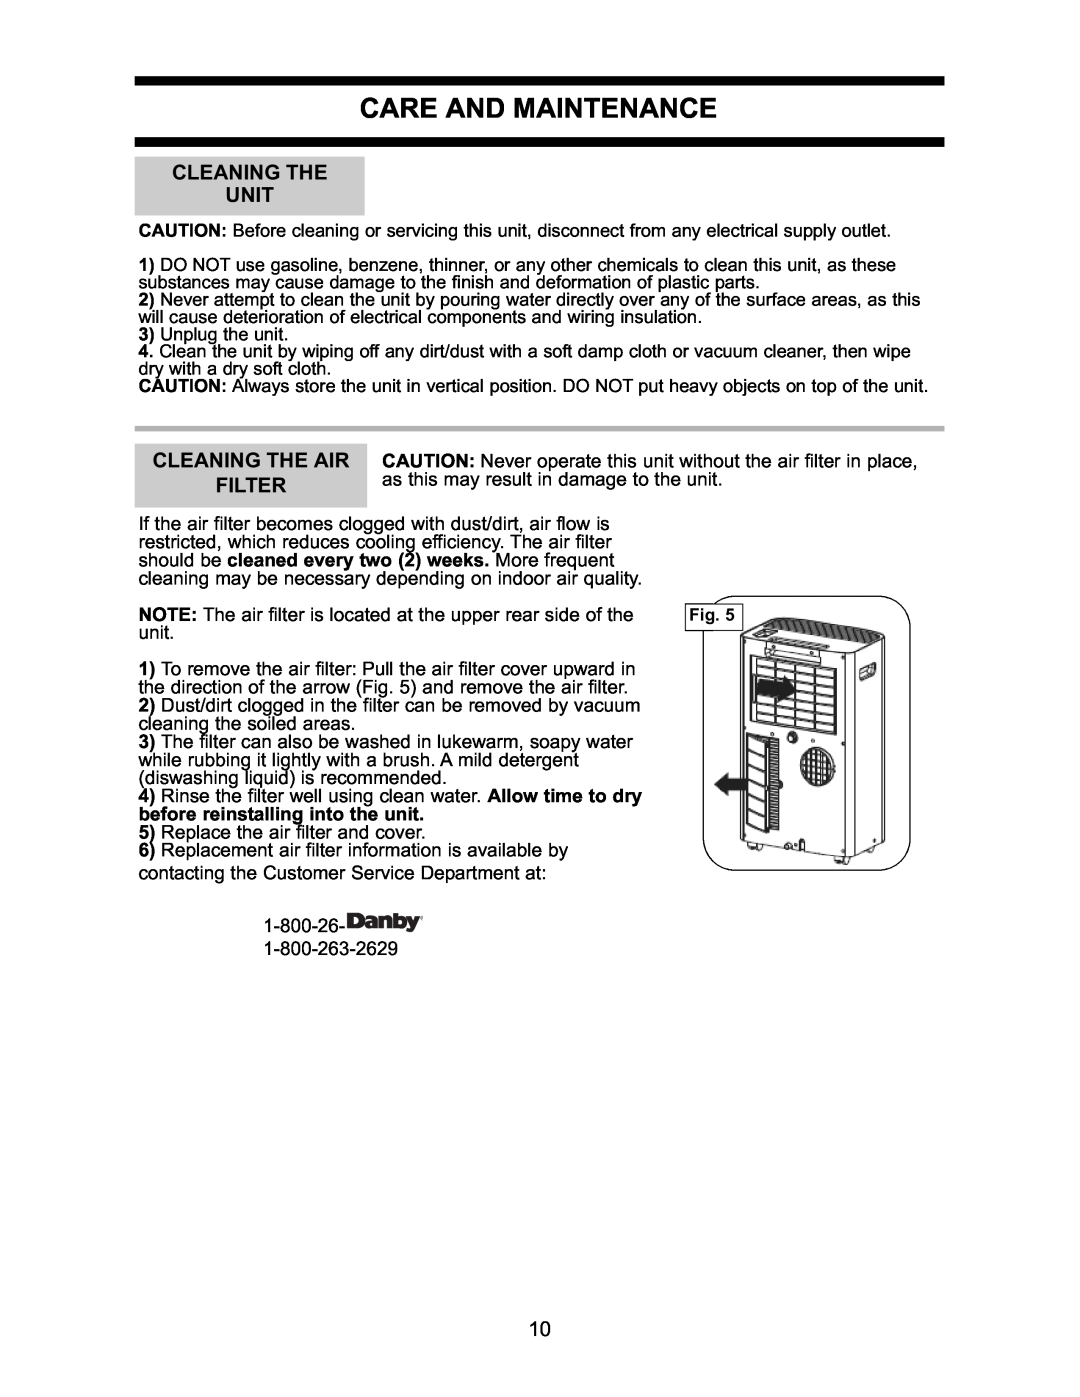 Danby DPAC7099 operating instructions Care And Maintenance, Cleaning The Unit, Filter 